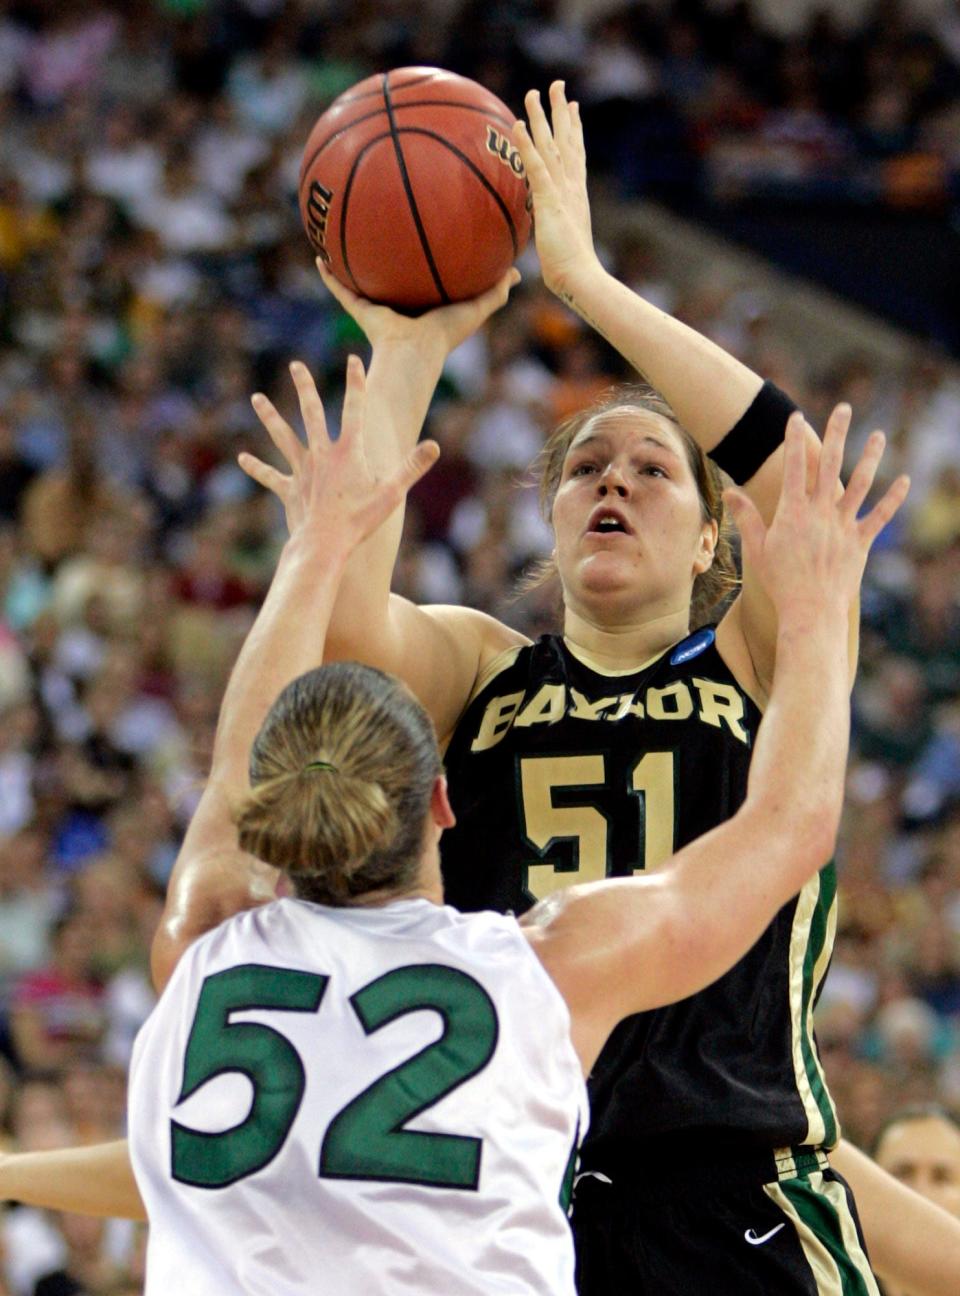 Former NCAA star Emily Niemann struggled to find acceptance in the 2000s at Baylor because she identified as lesbian.